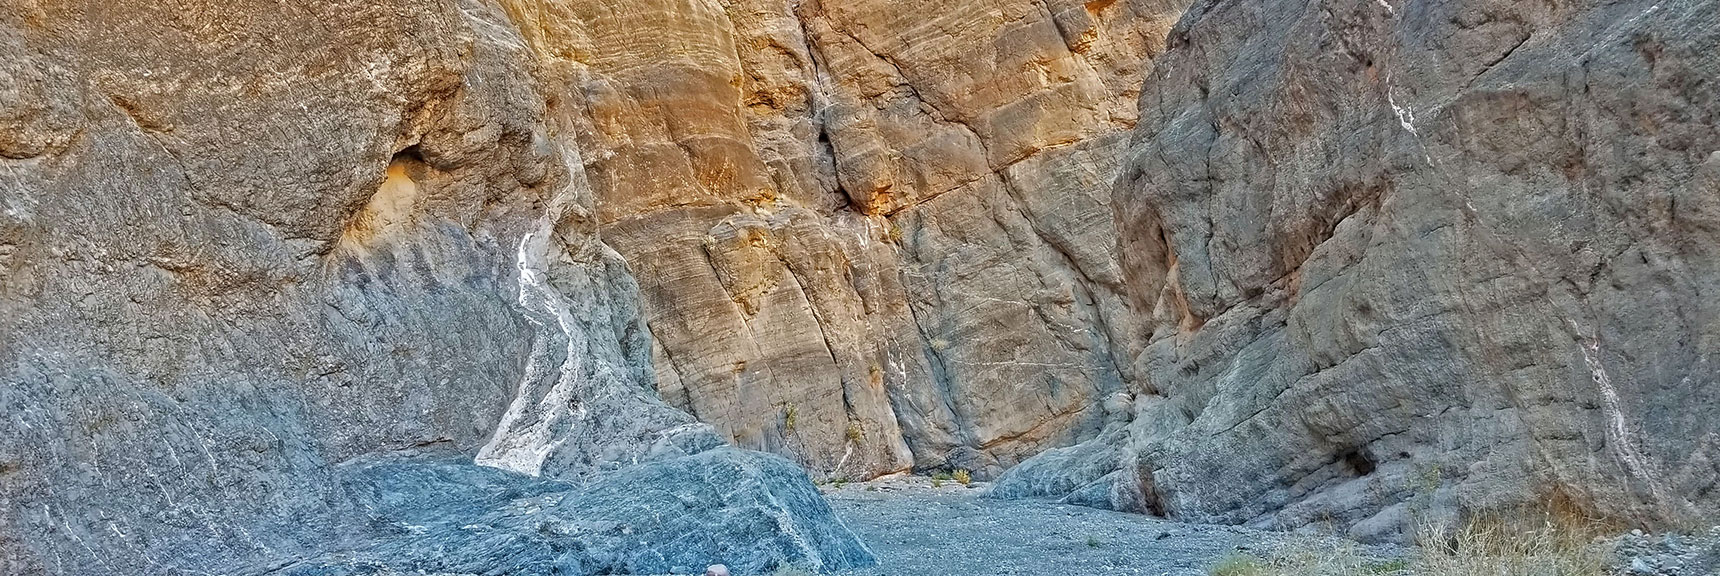 Curious Veins of White Minerals Create a Multitude of Unique Patterns | Fall Canyon | Death Valley National Park, California